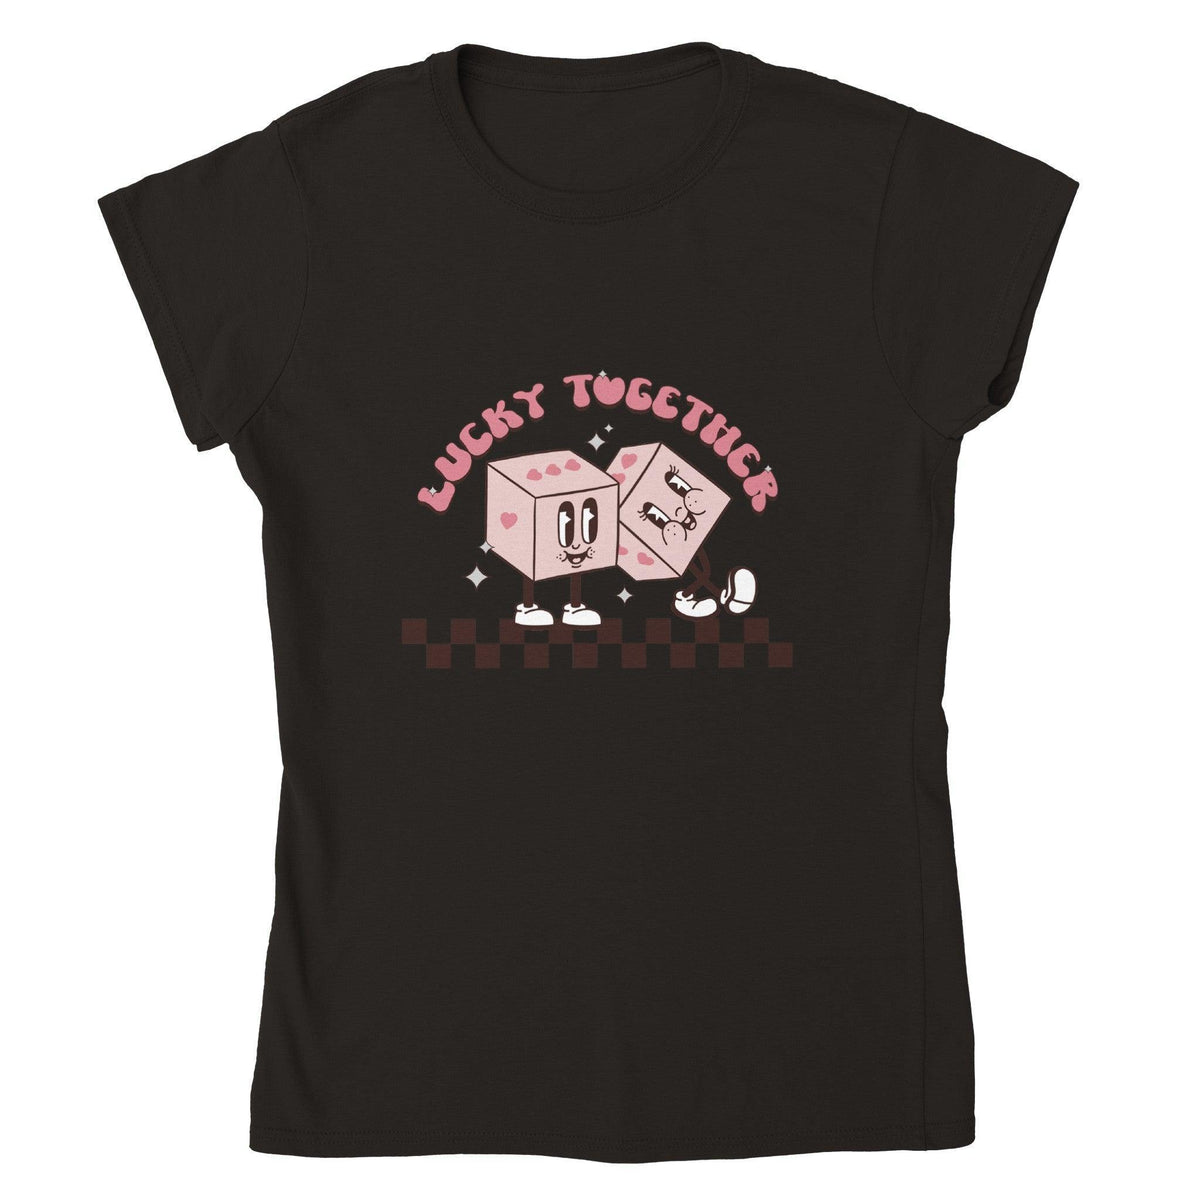 LUCKY TOGETHER T-shirt-Regular Fit Tee-StylinArts